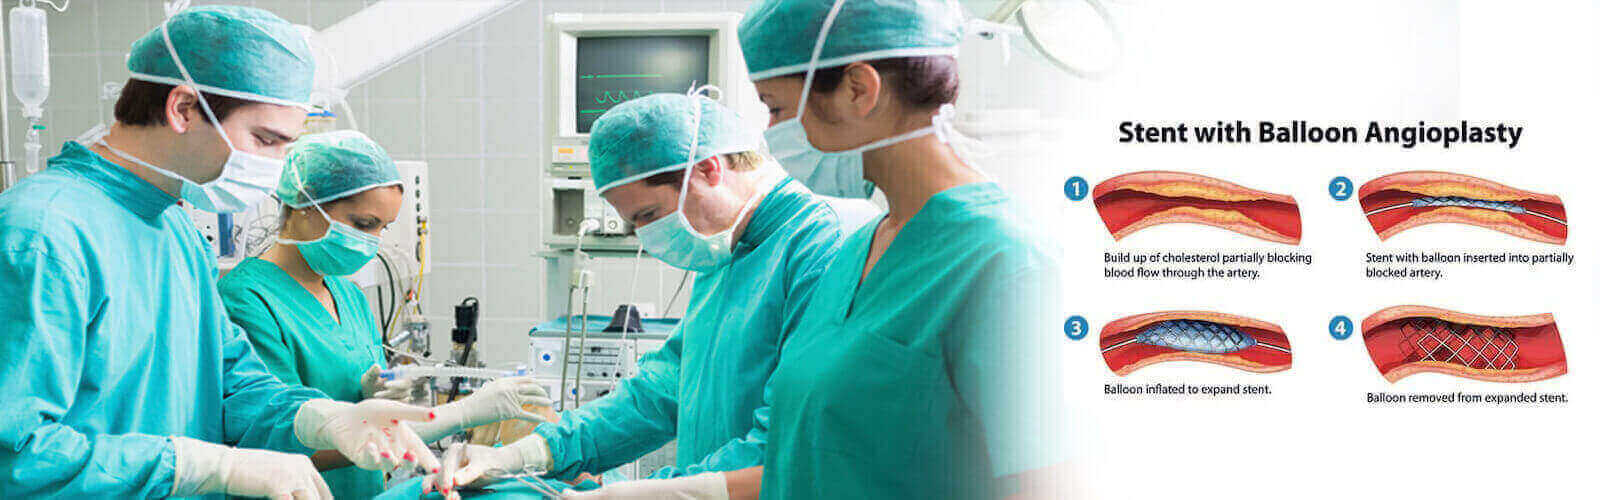 Angioplasty Surgery in India